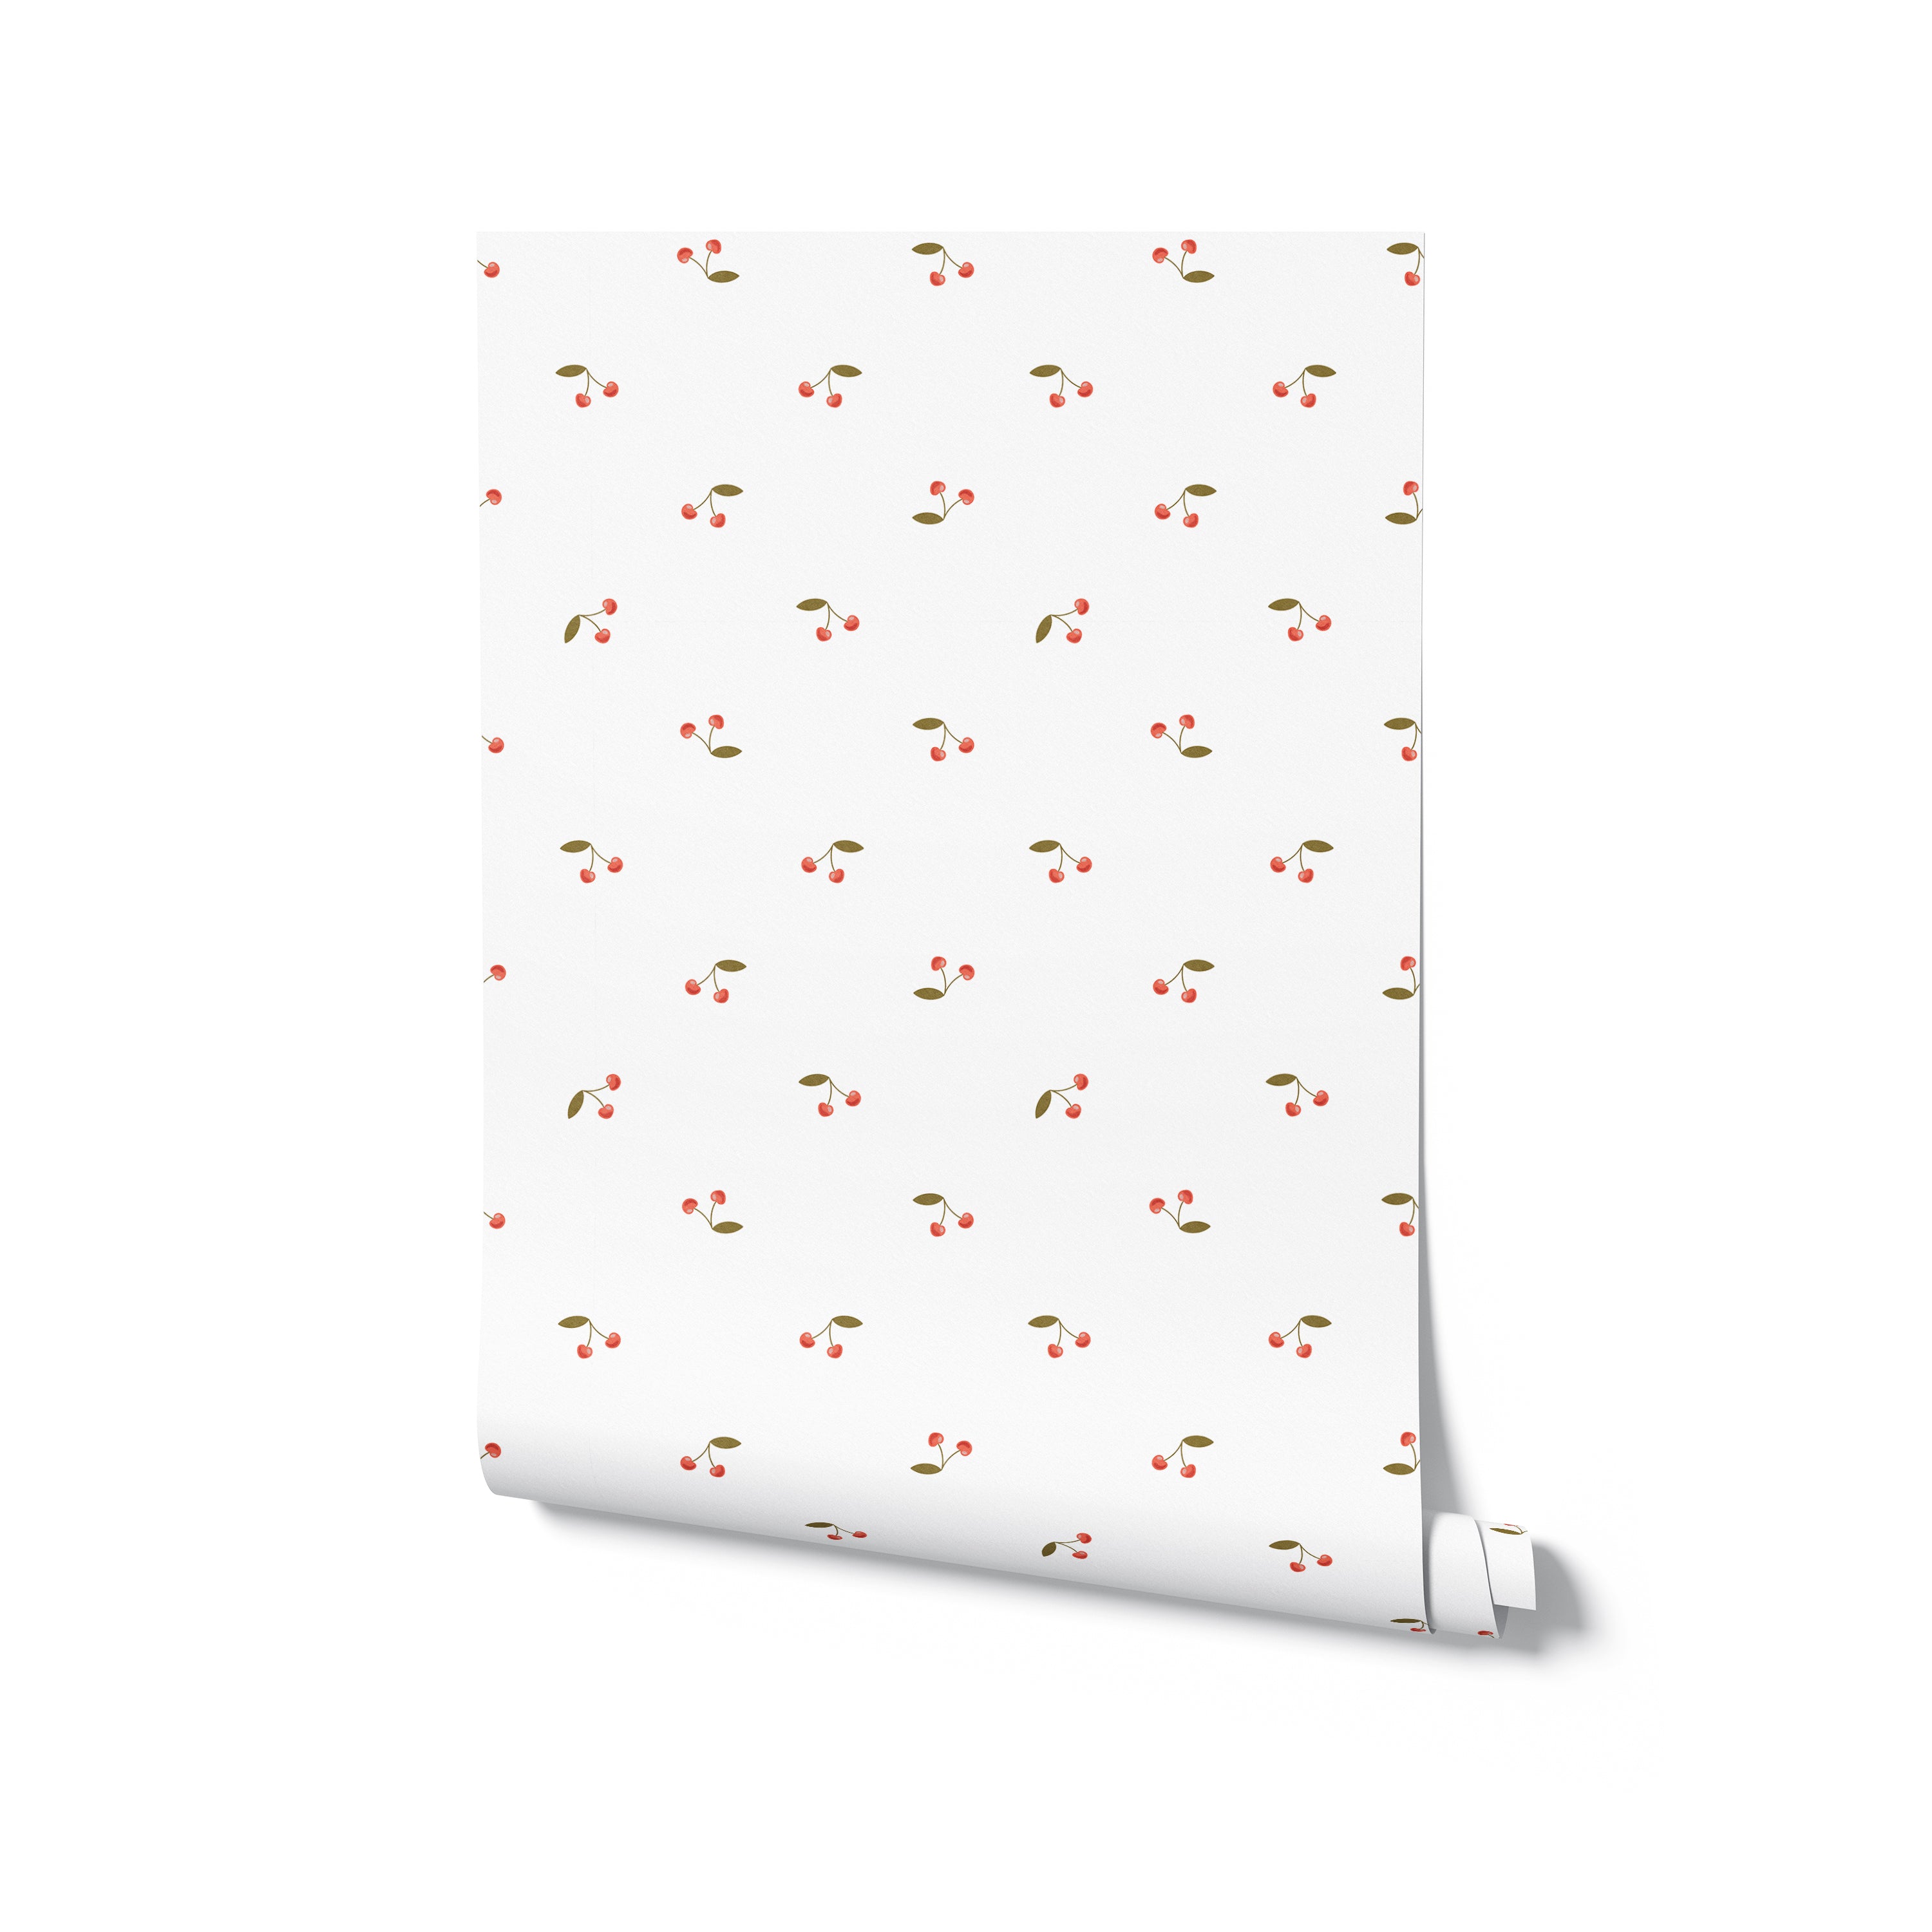 A rolled wallpaper sample showing a minimalist cherry pattern with tiny red cherries and green leaves scattered across a bright white backdrop, ideal for adding a subtle touch of nature to any room.